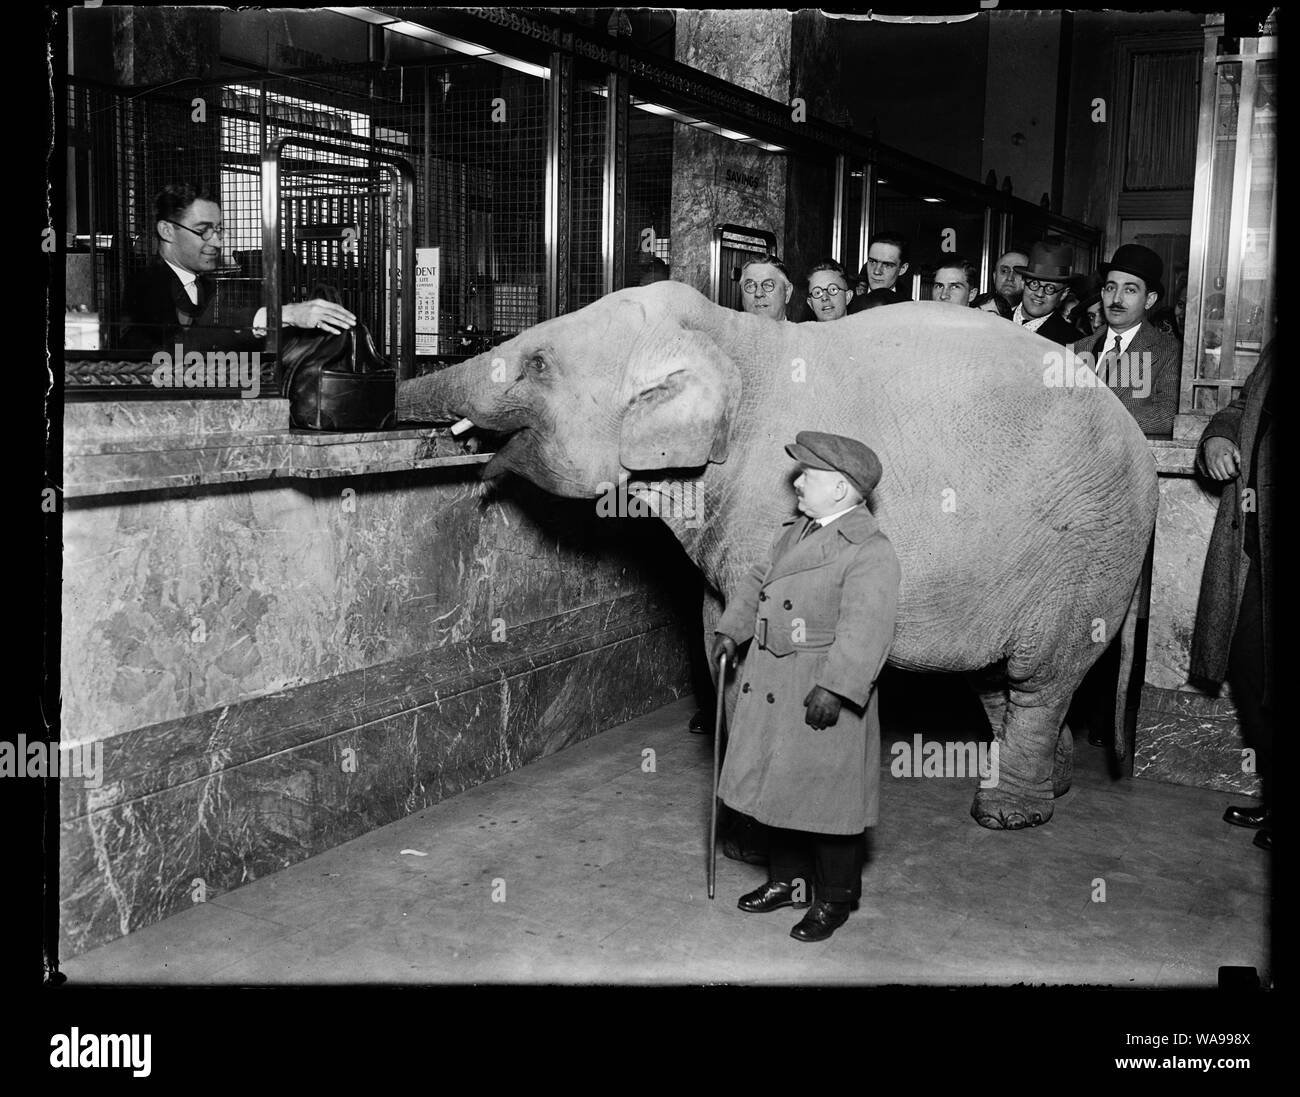 Charlie Becker, midget trainer with Singer's Midgets, walked the smallest elephant of his troupe to Merchant's Bank, and made a deposit for Keith's Theatre. The elephant delivered the money satchel directly to the receiving teller Stock Photo